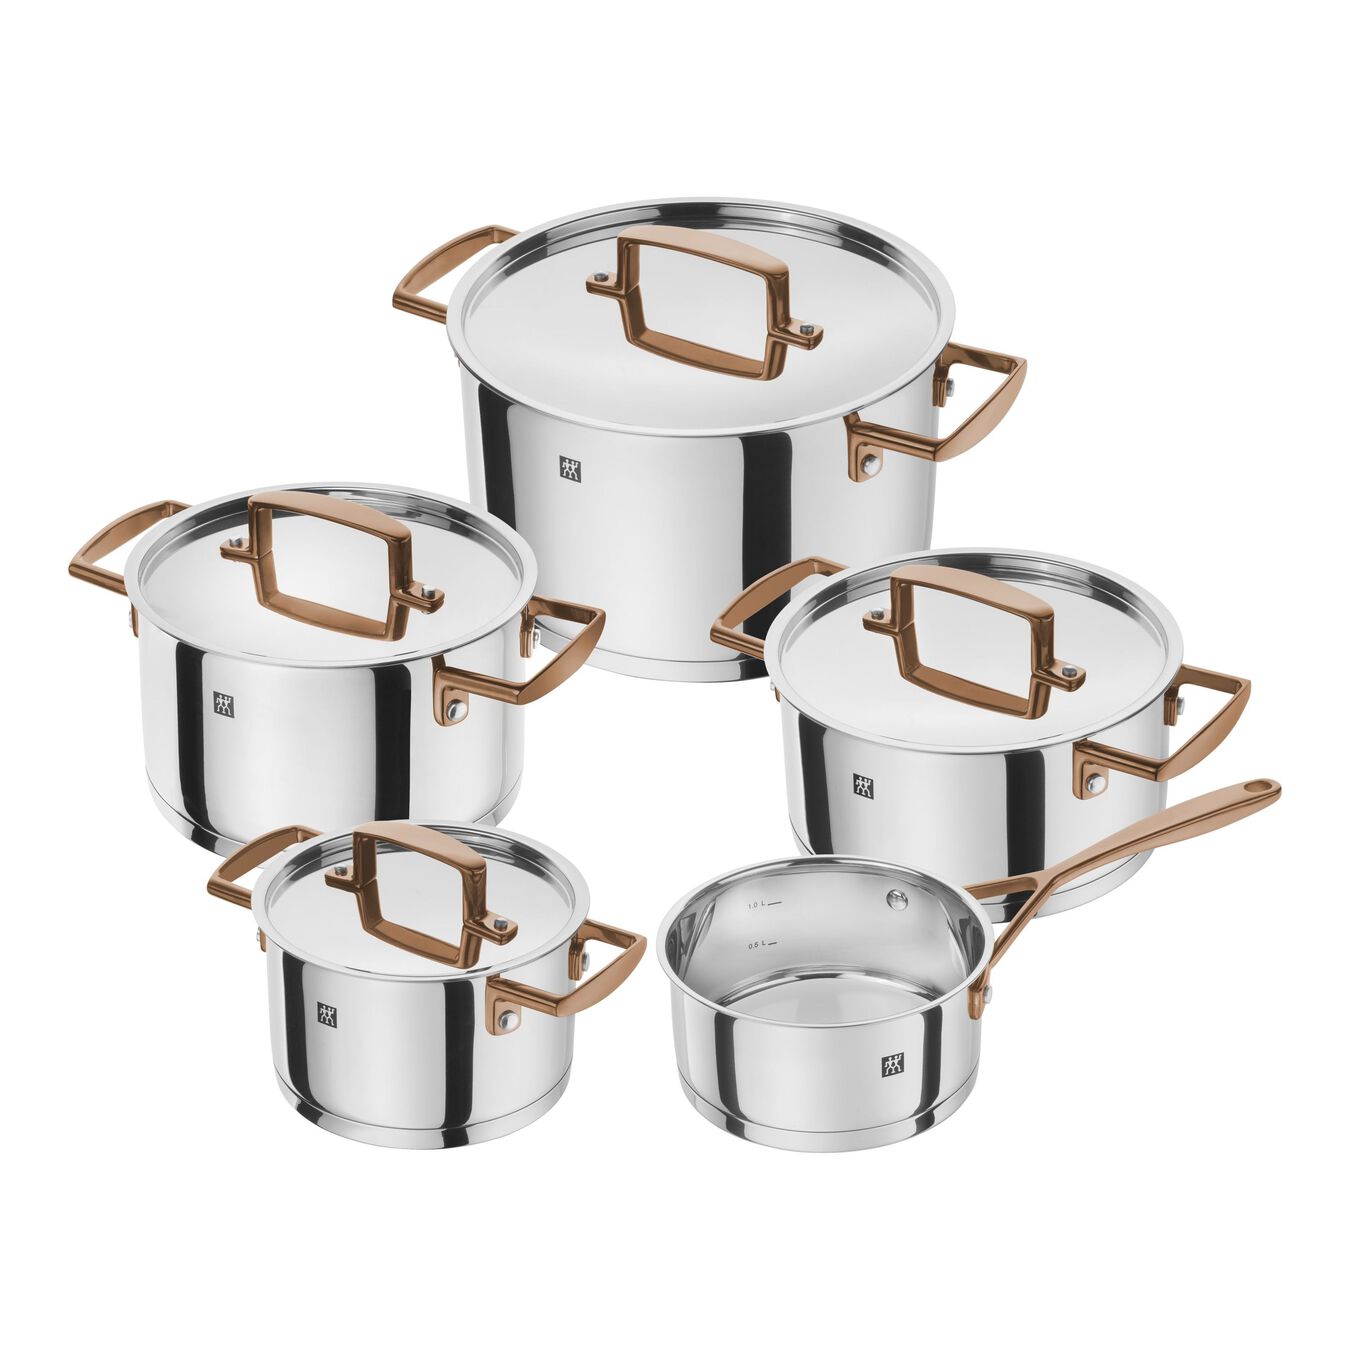 Pots and pans set 5-pcs, 18/10 Stainless Steel,,large 1